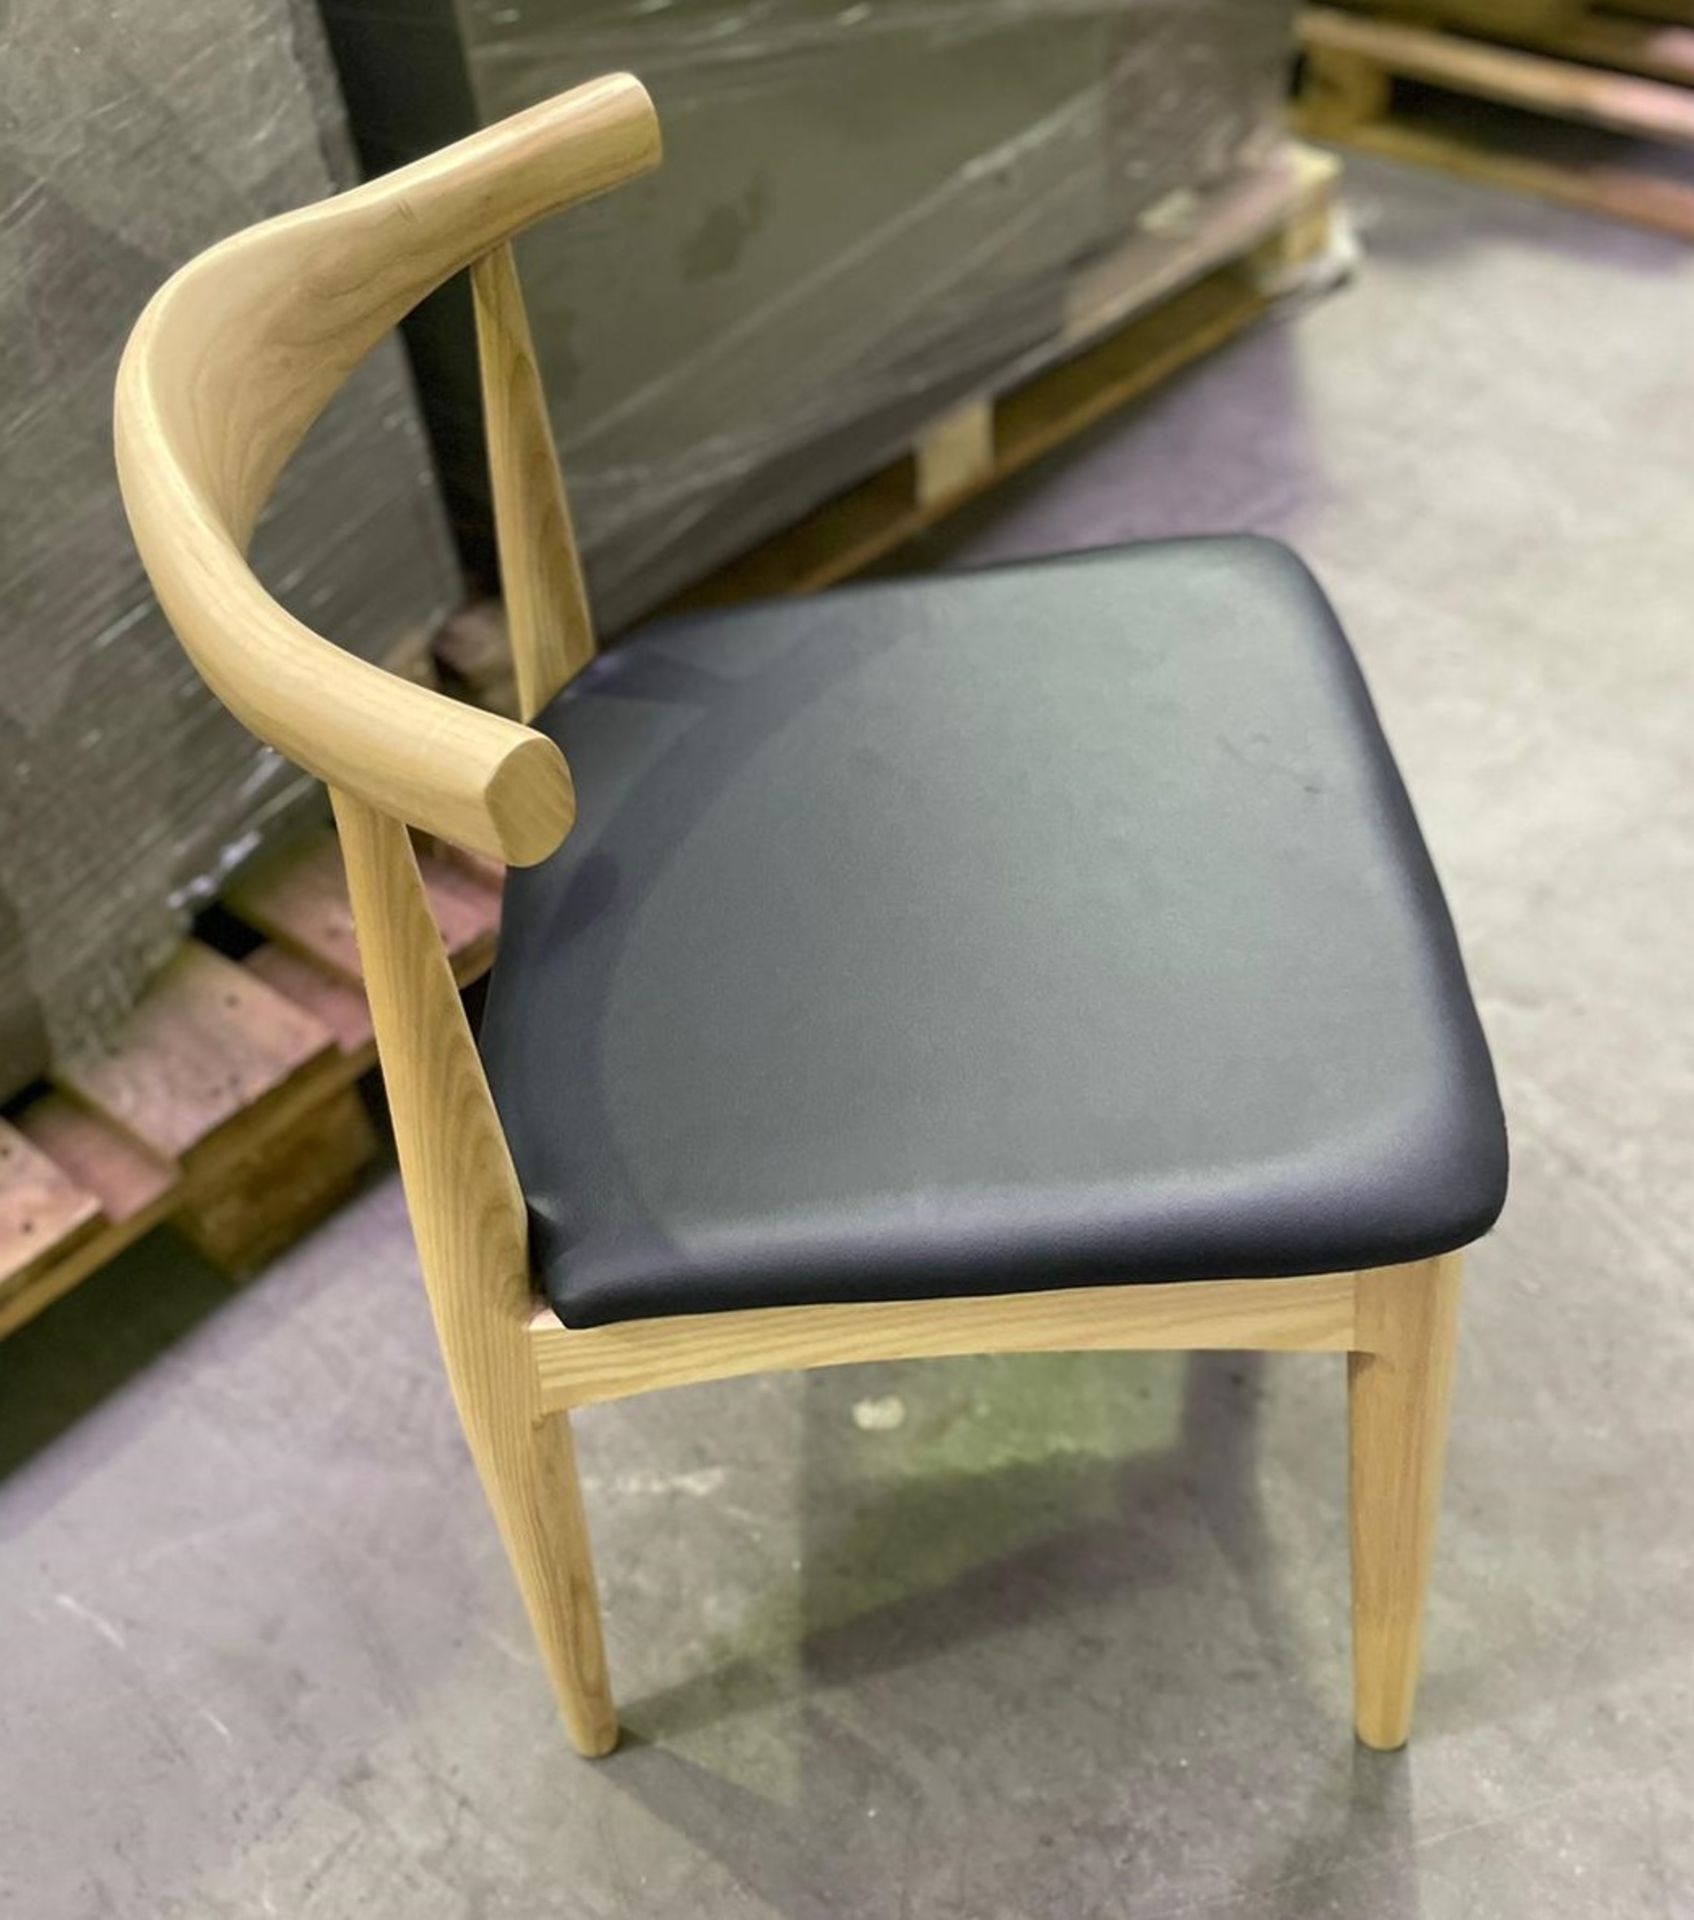 4 x Hans Wegner Inspired Elbow Chair - Solid Wood With Light Stain Ash Finish And Black Seat Pad - - Image 7 of 7